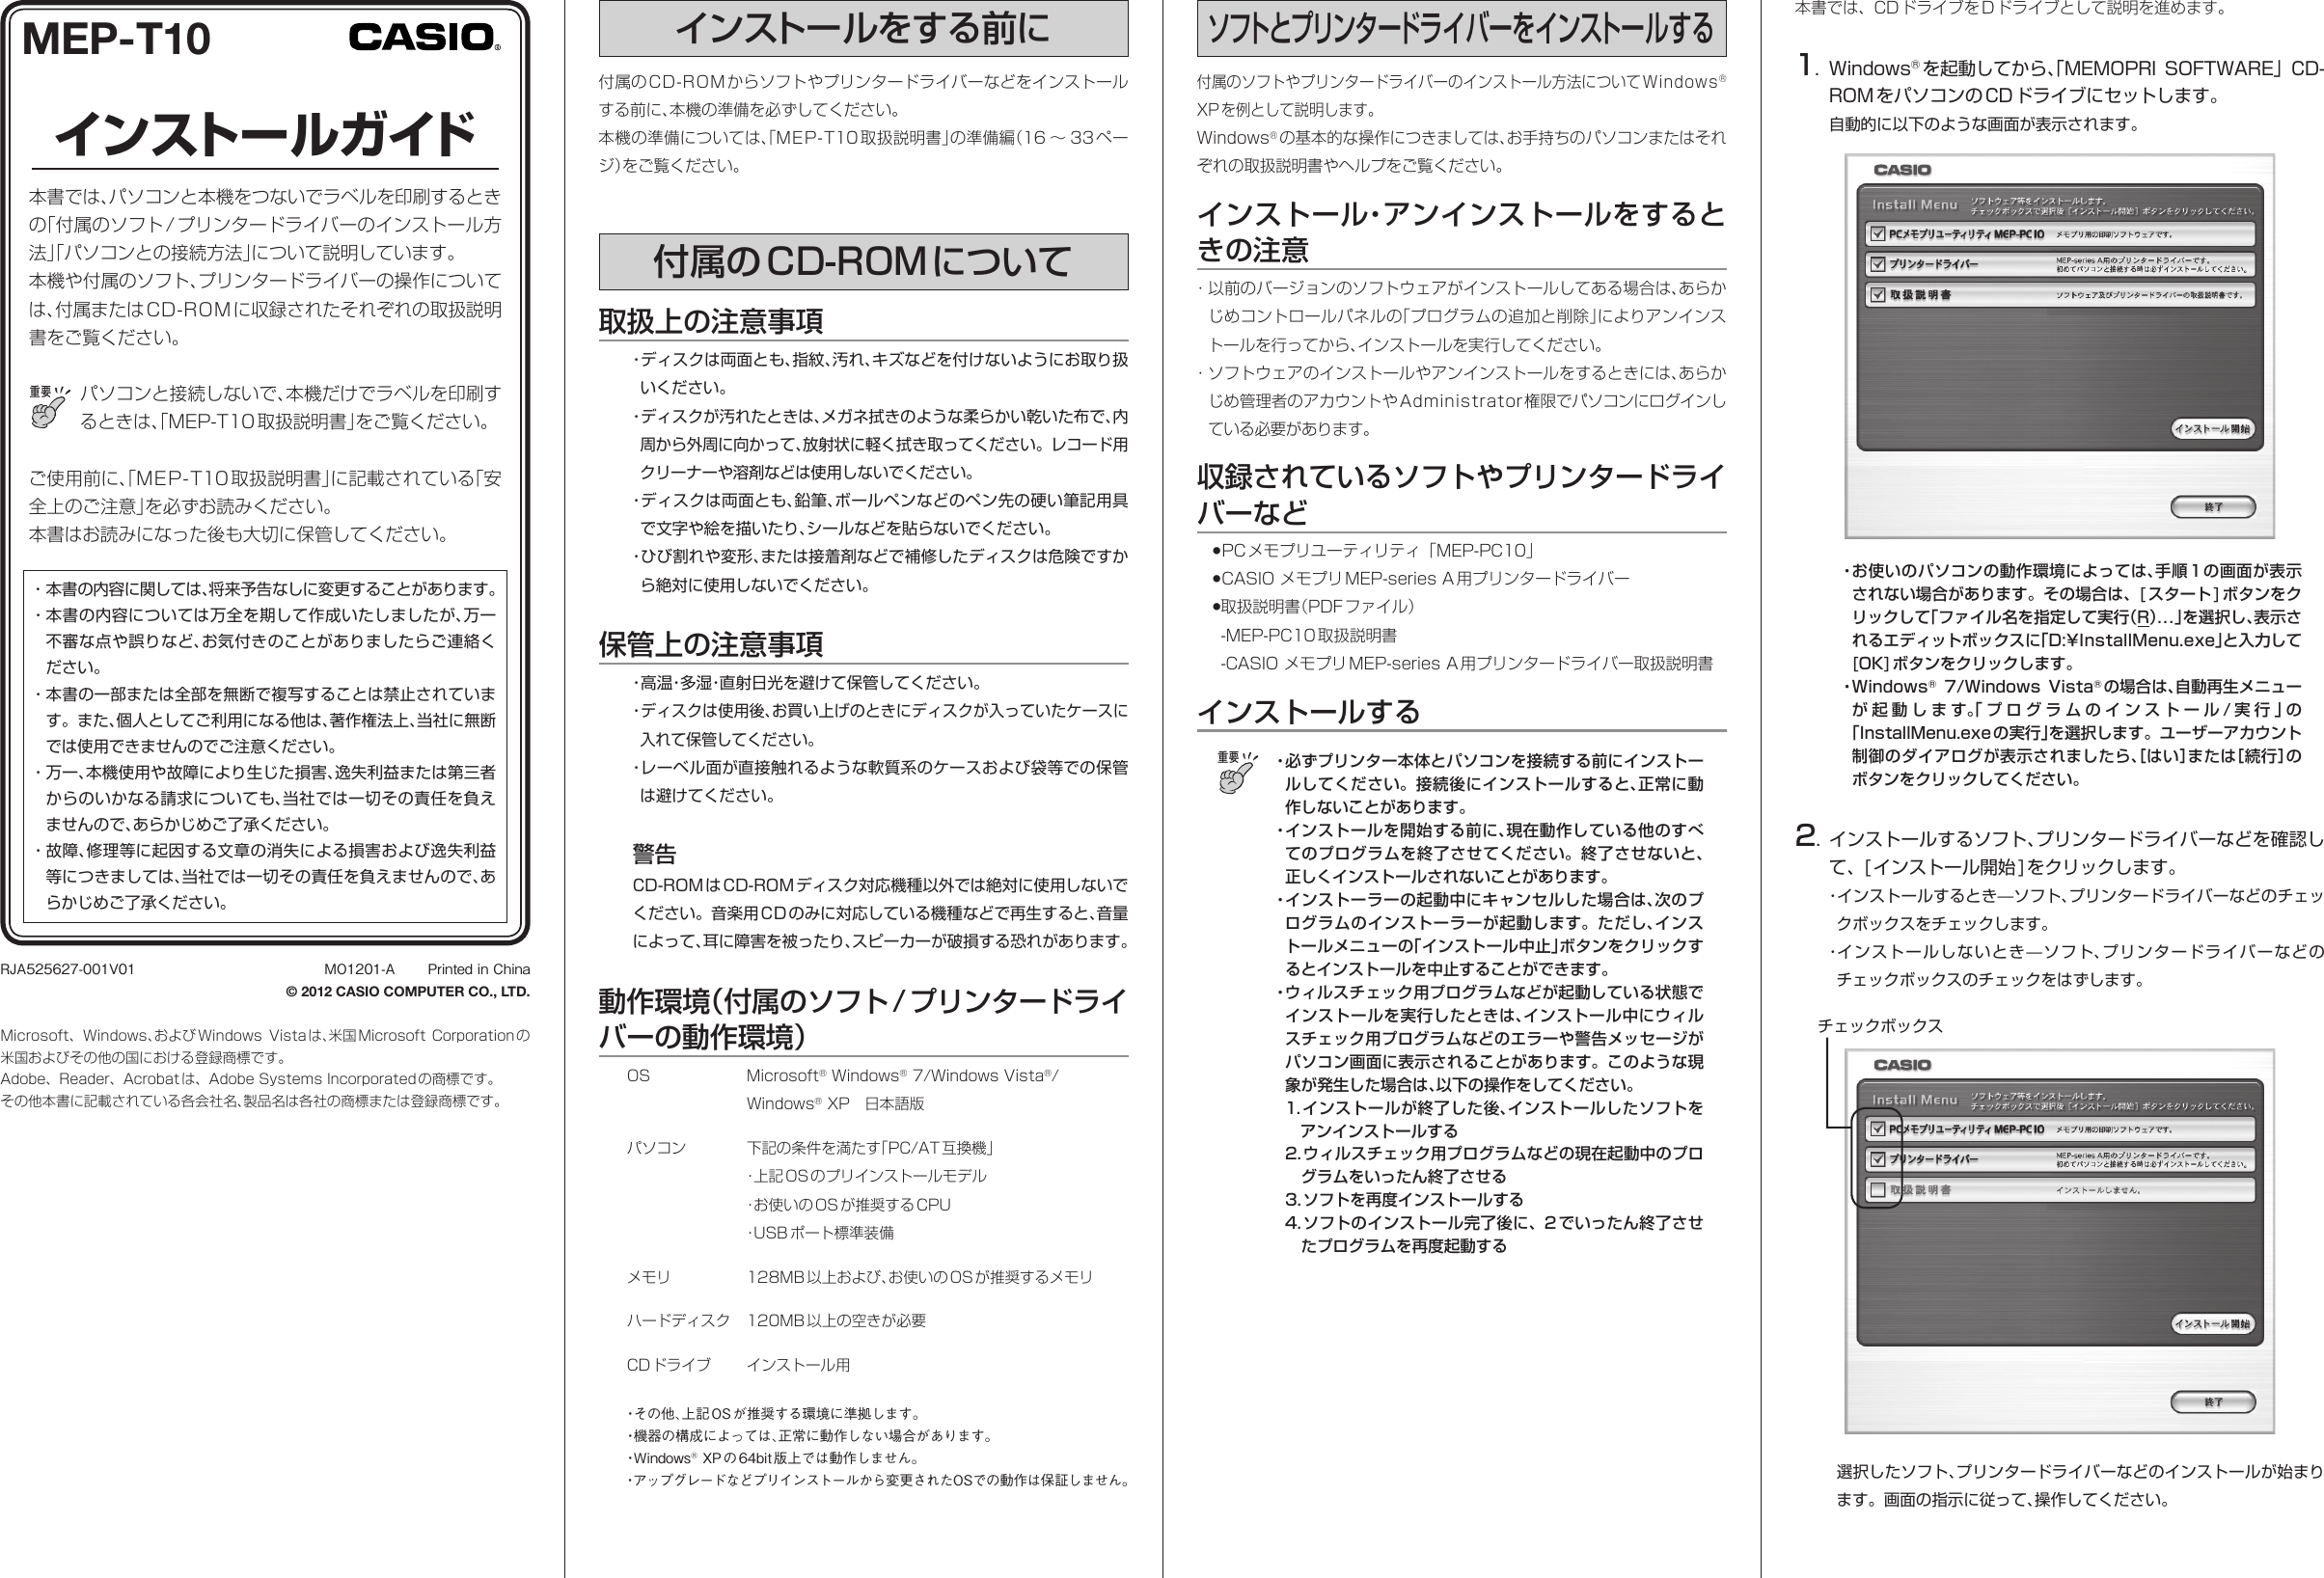 Page 2 of 4 - Casio MEP-T10_Install インストールガイド MEP-T10 Install Guide